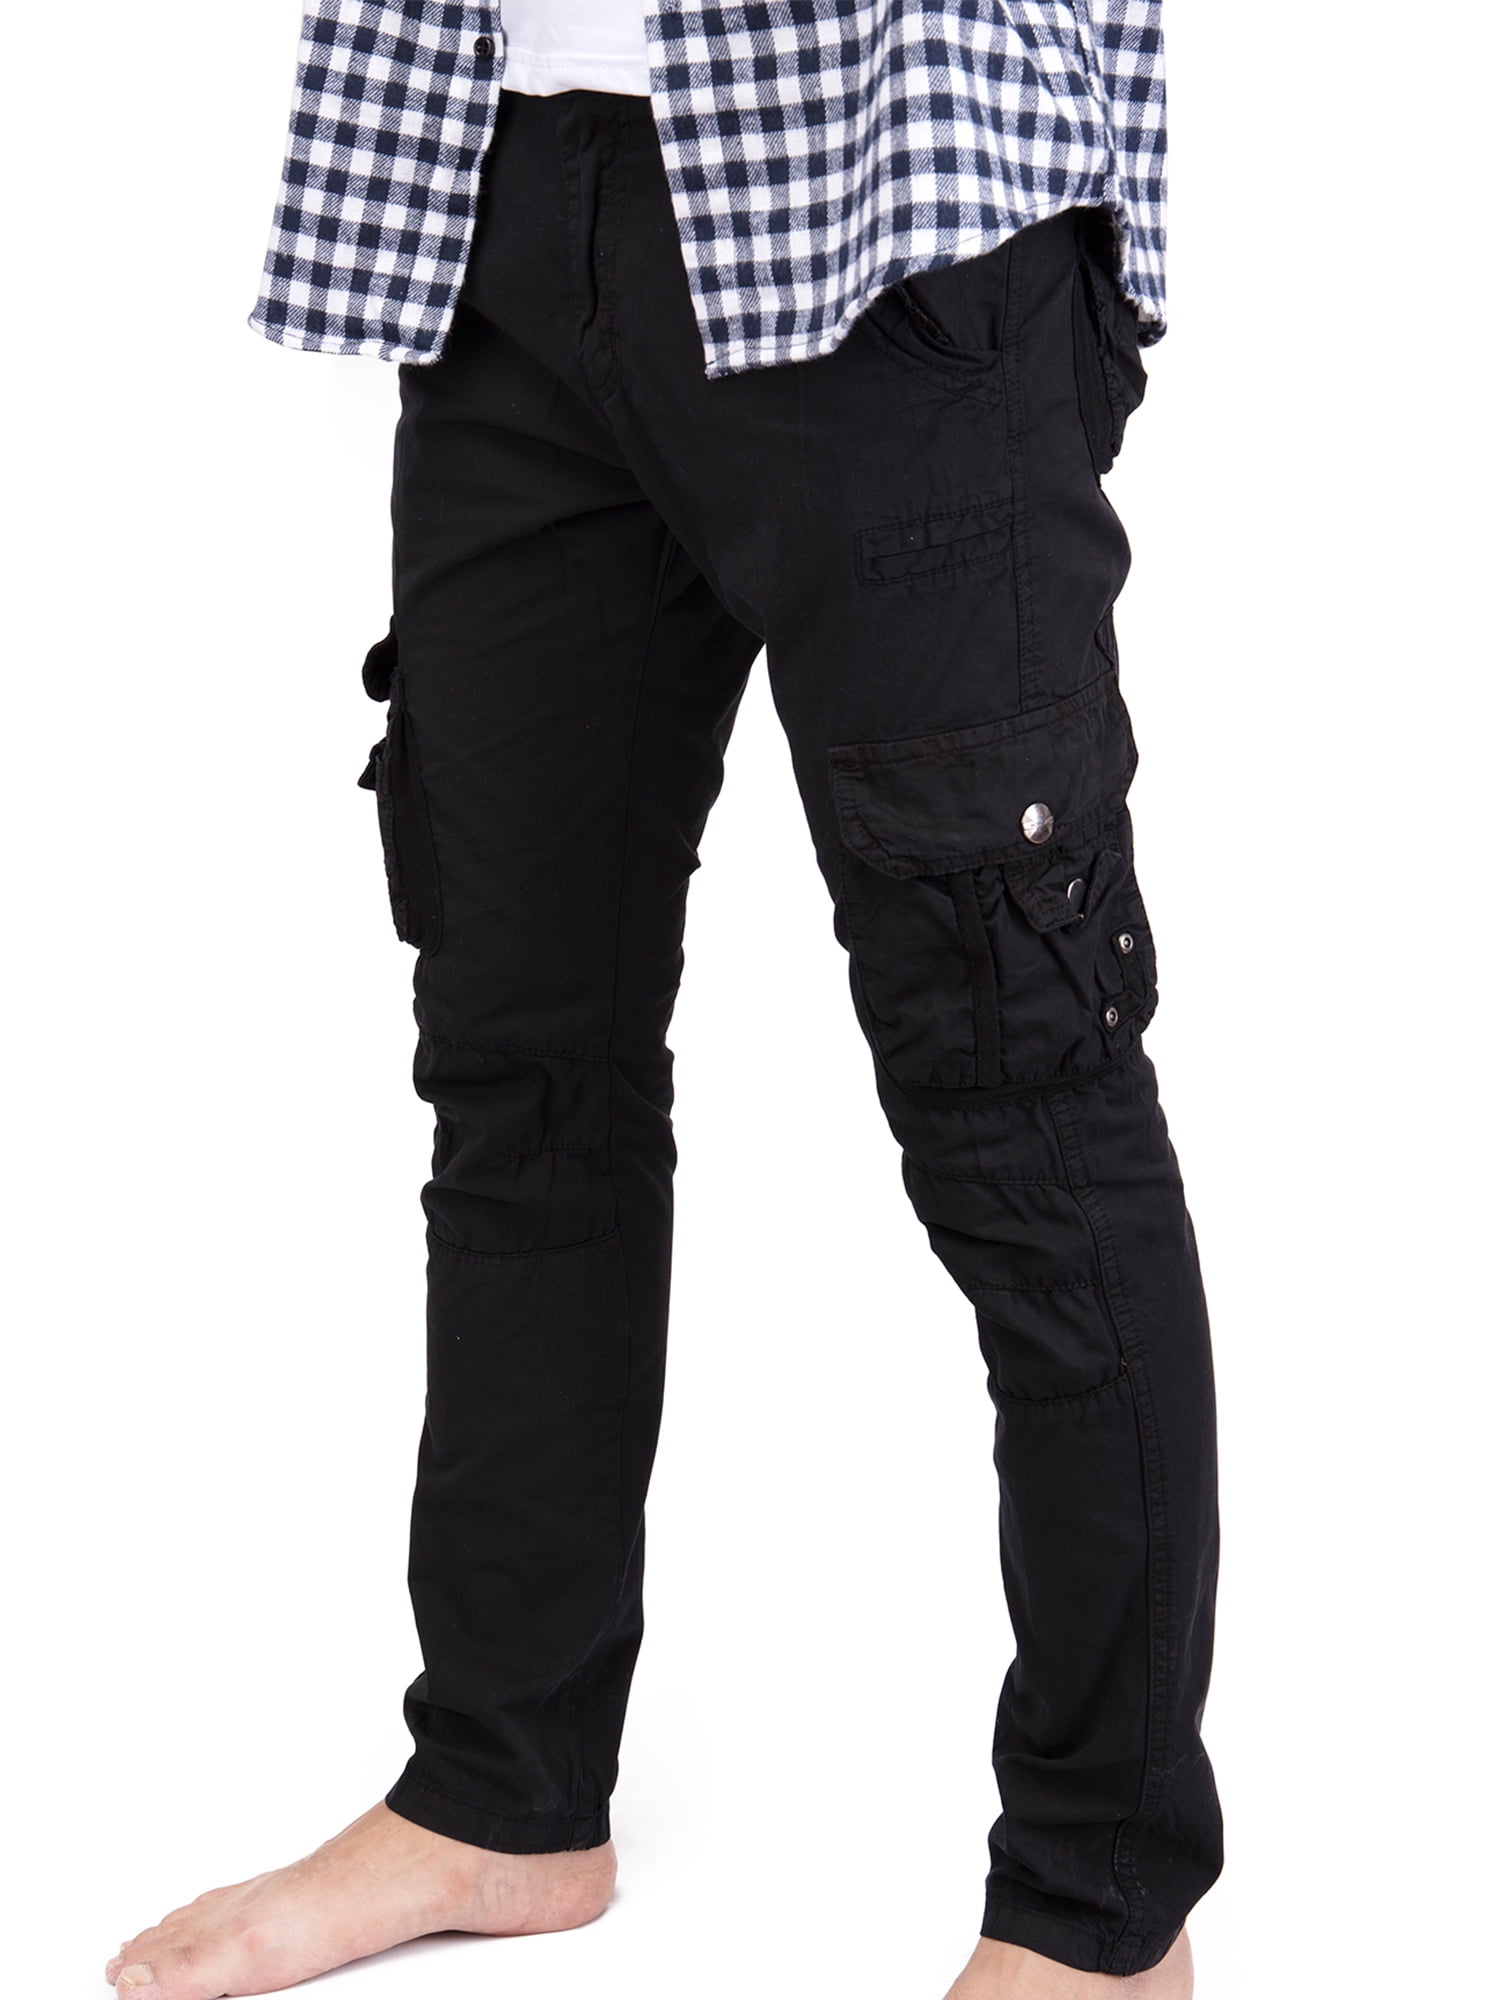 SAYFUT - Big Mens Cargo Pants with Pockets Fit Wild Hunting Trousers ...